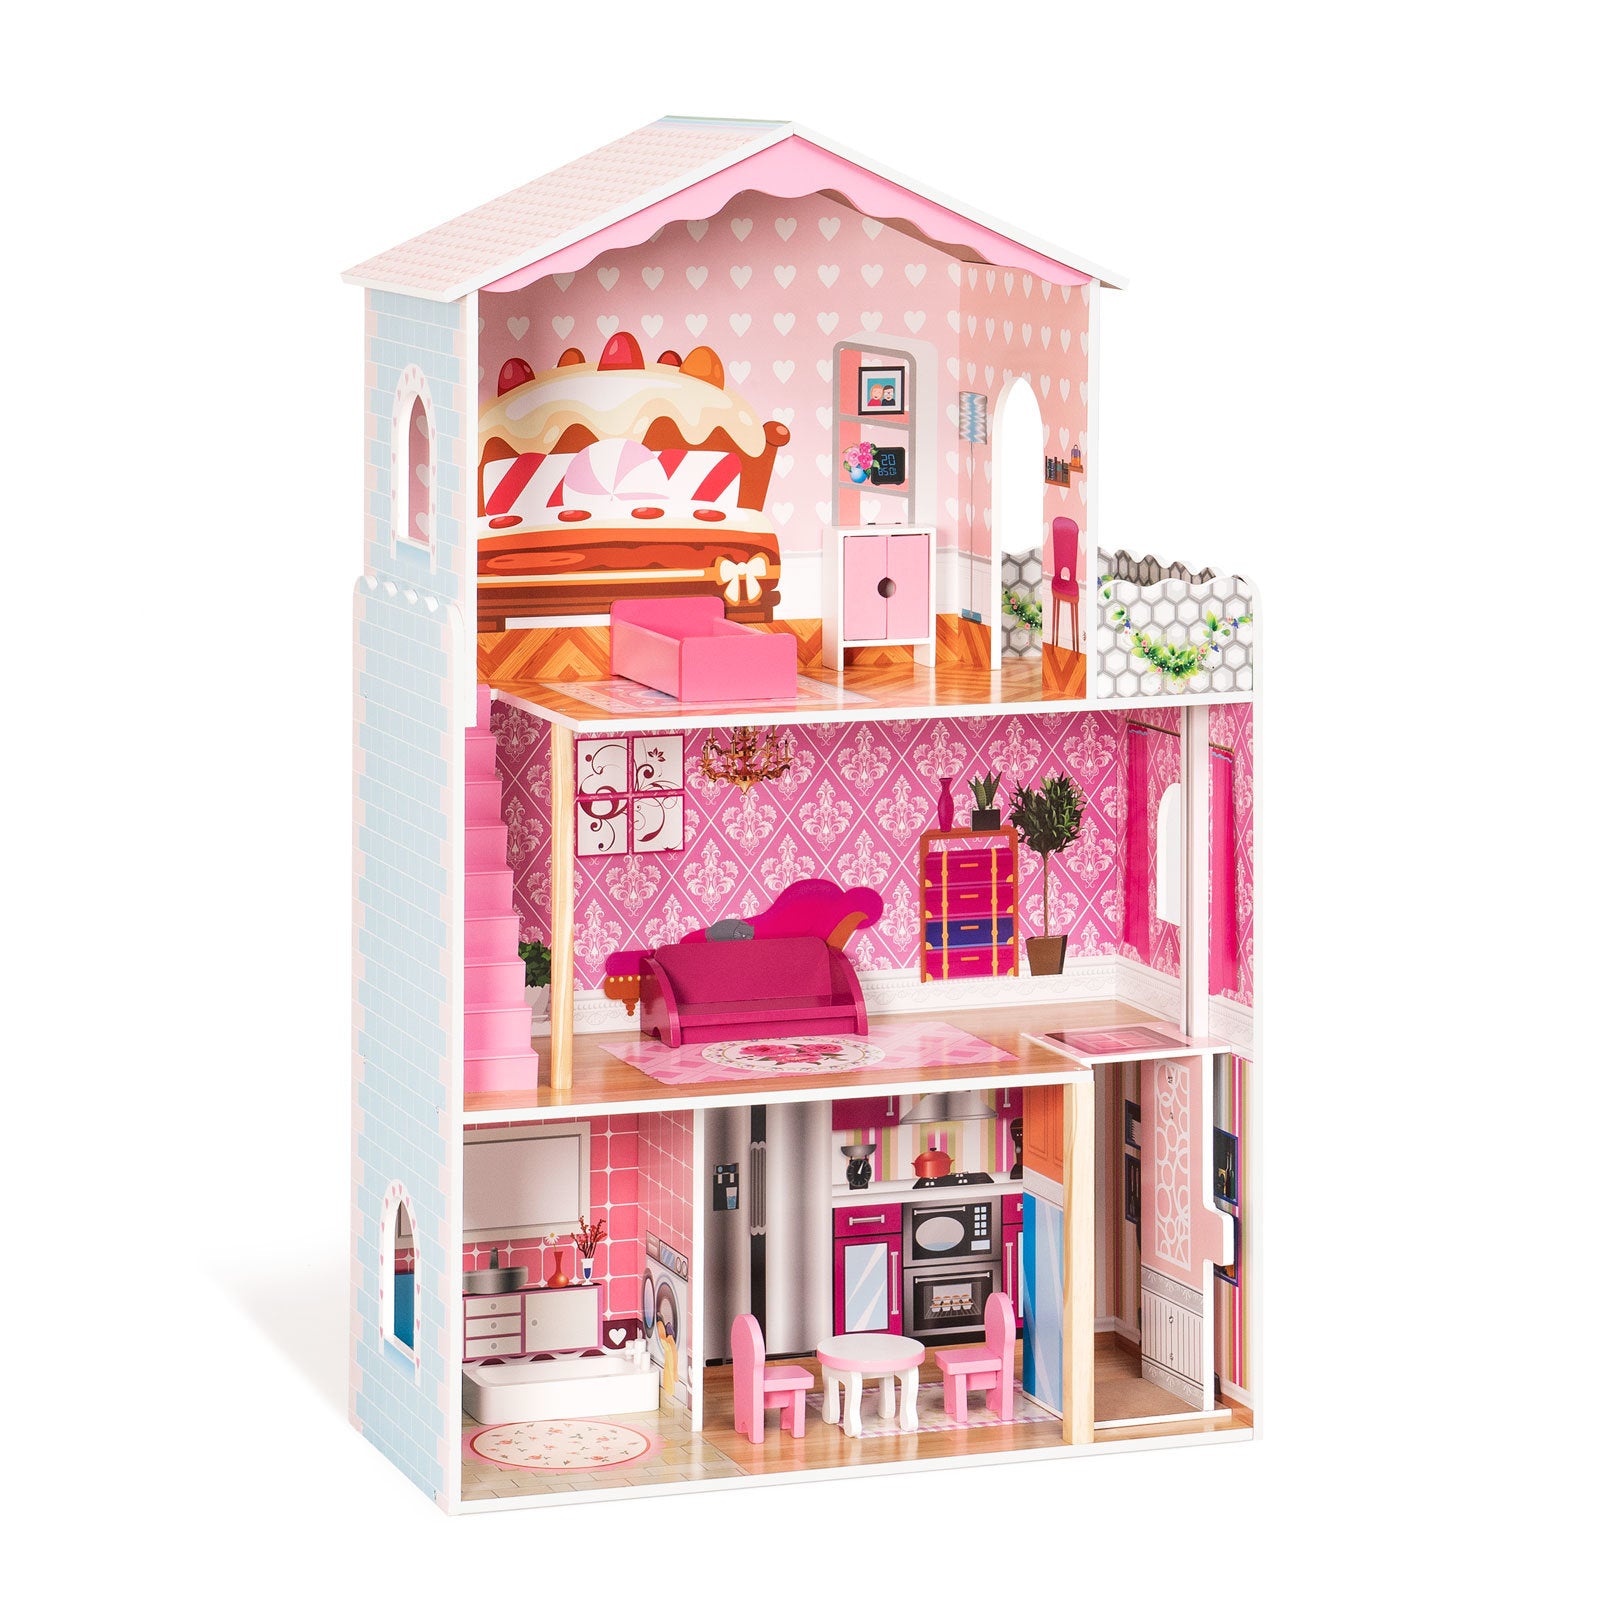 Dreamy Wooden Dollhouse; Gift for kids